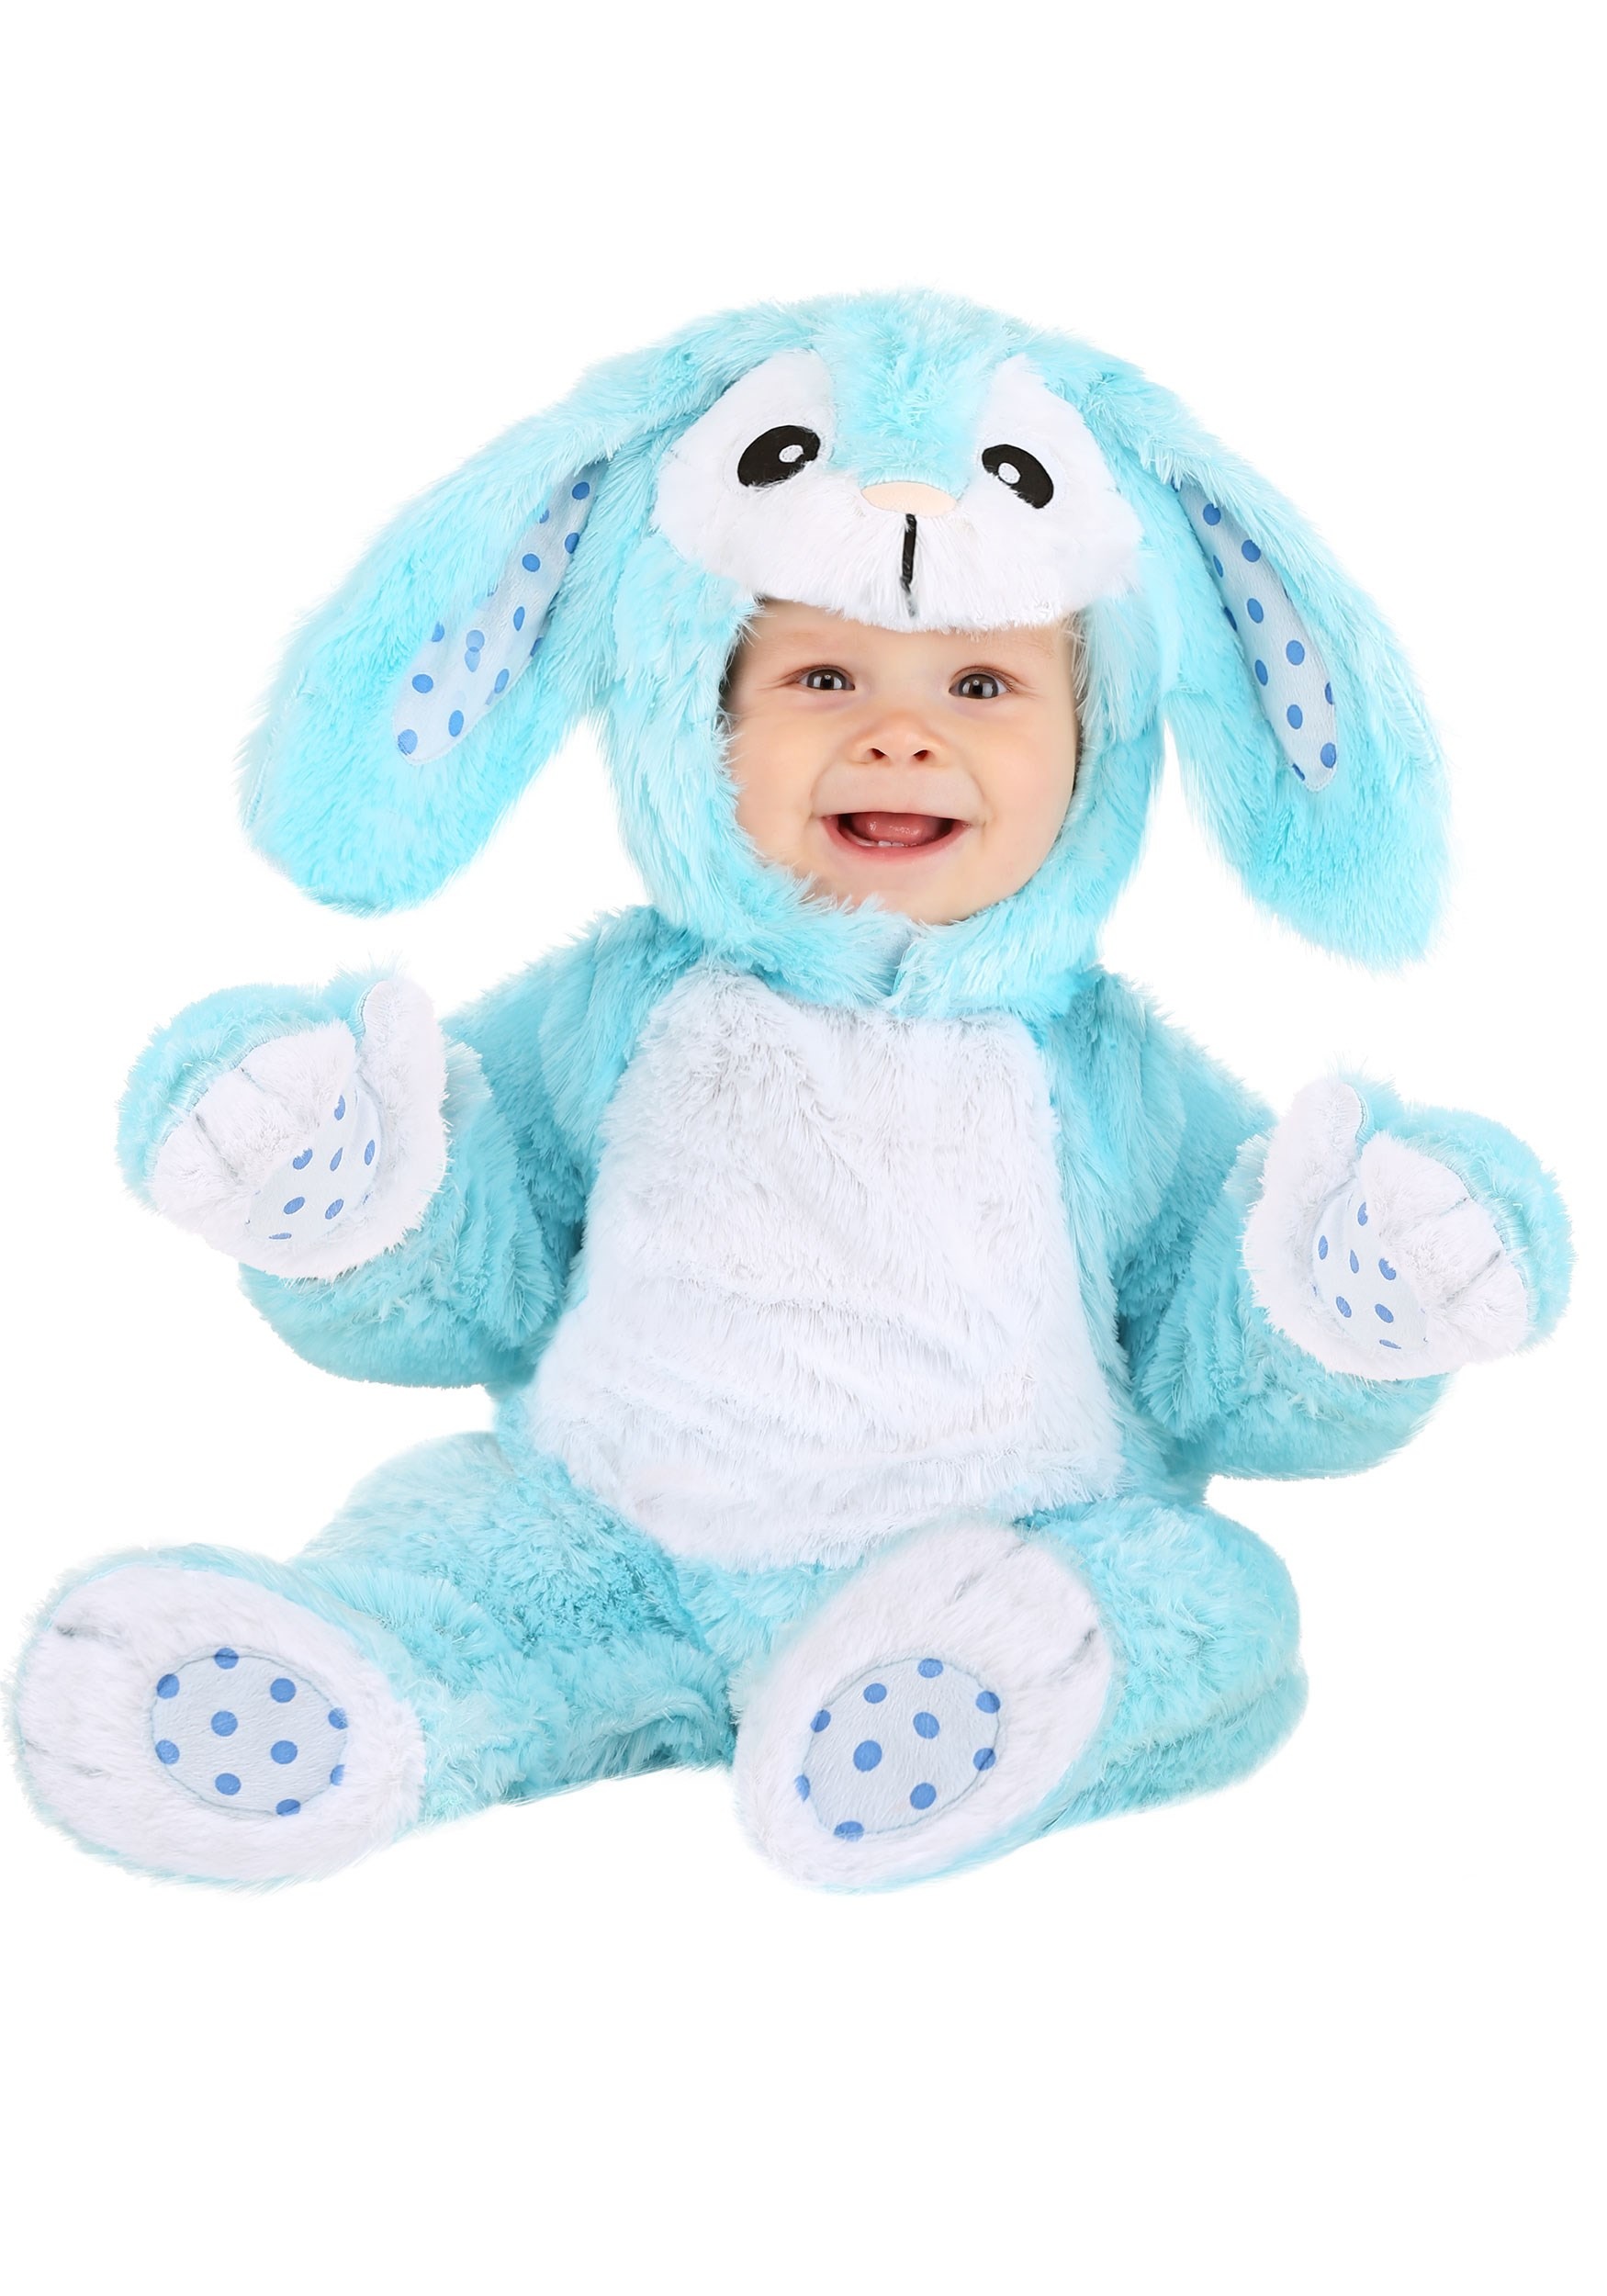 Photos - Fancy Dress Babies FUN Costumes Fluffy Blue Bunny Baby Costume Blue/White FUN0573IN 